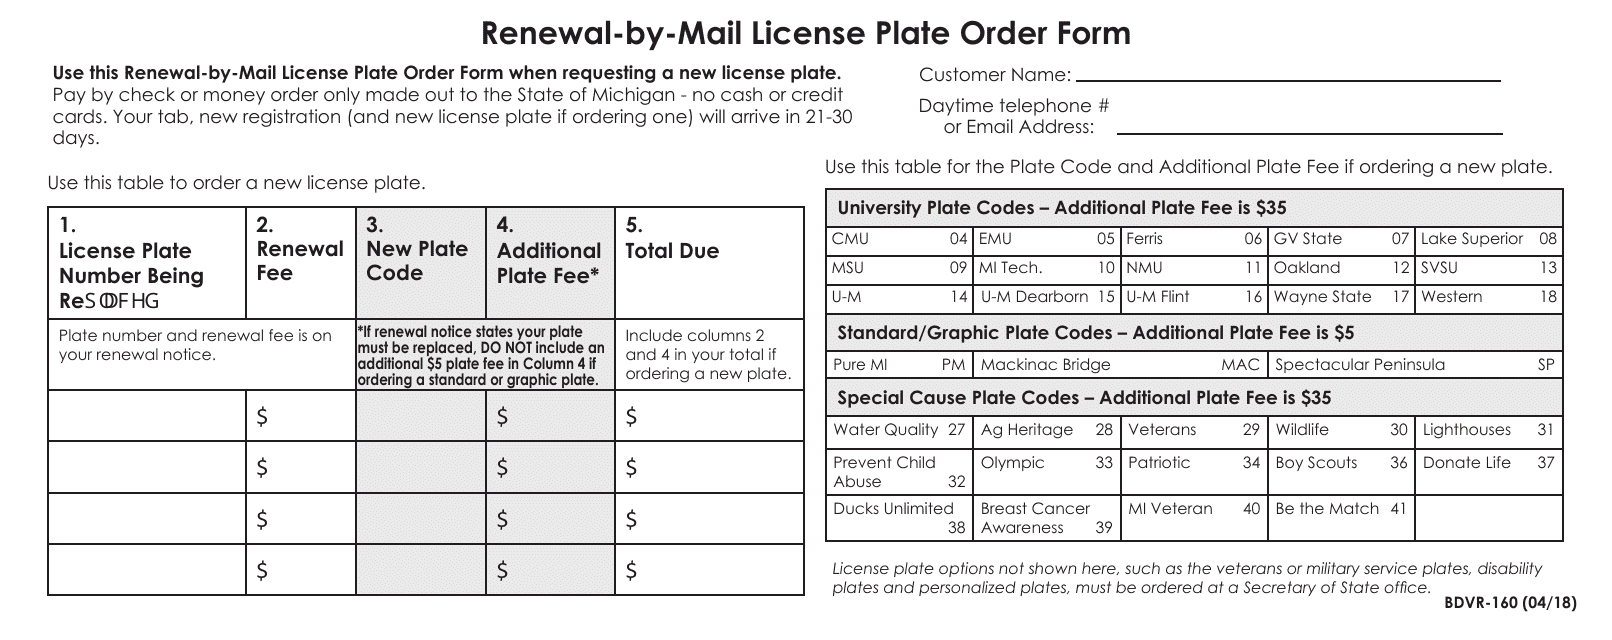 Form BDVR-160 Renewal-By-Mail License Plate Order Form - Michigan